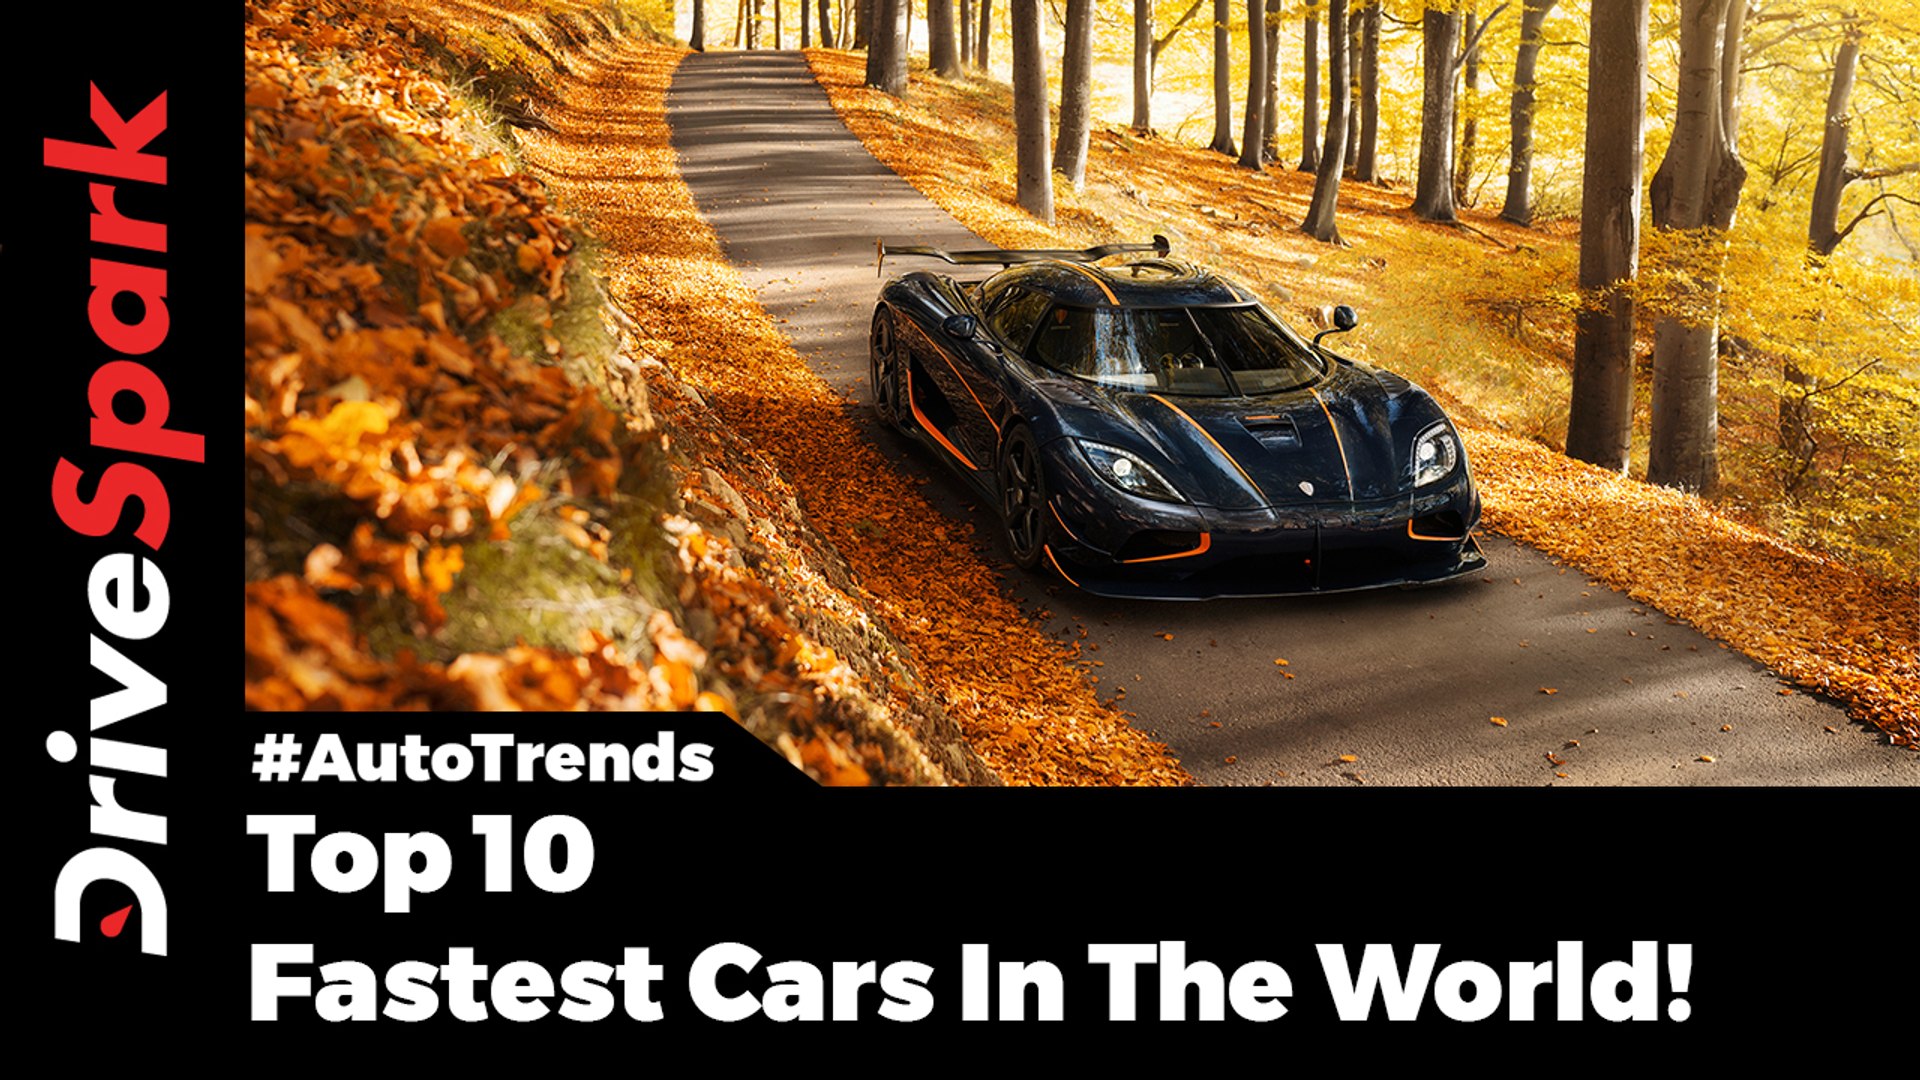 Top 10 Fastest Cars In The World 2017 - DriveSpark - video Dailymotion